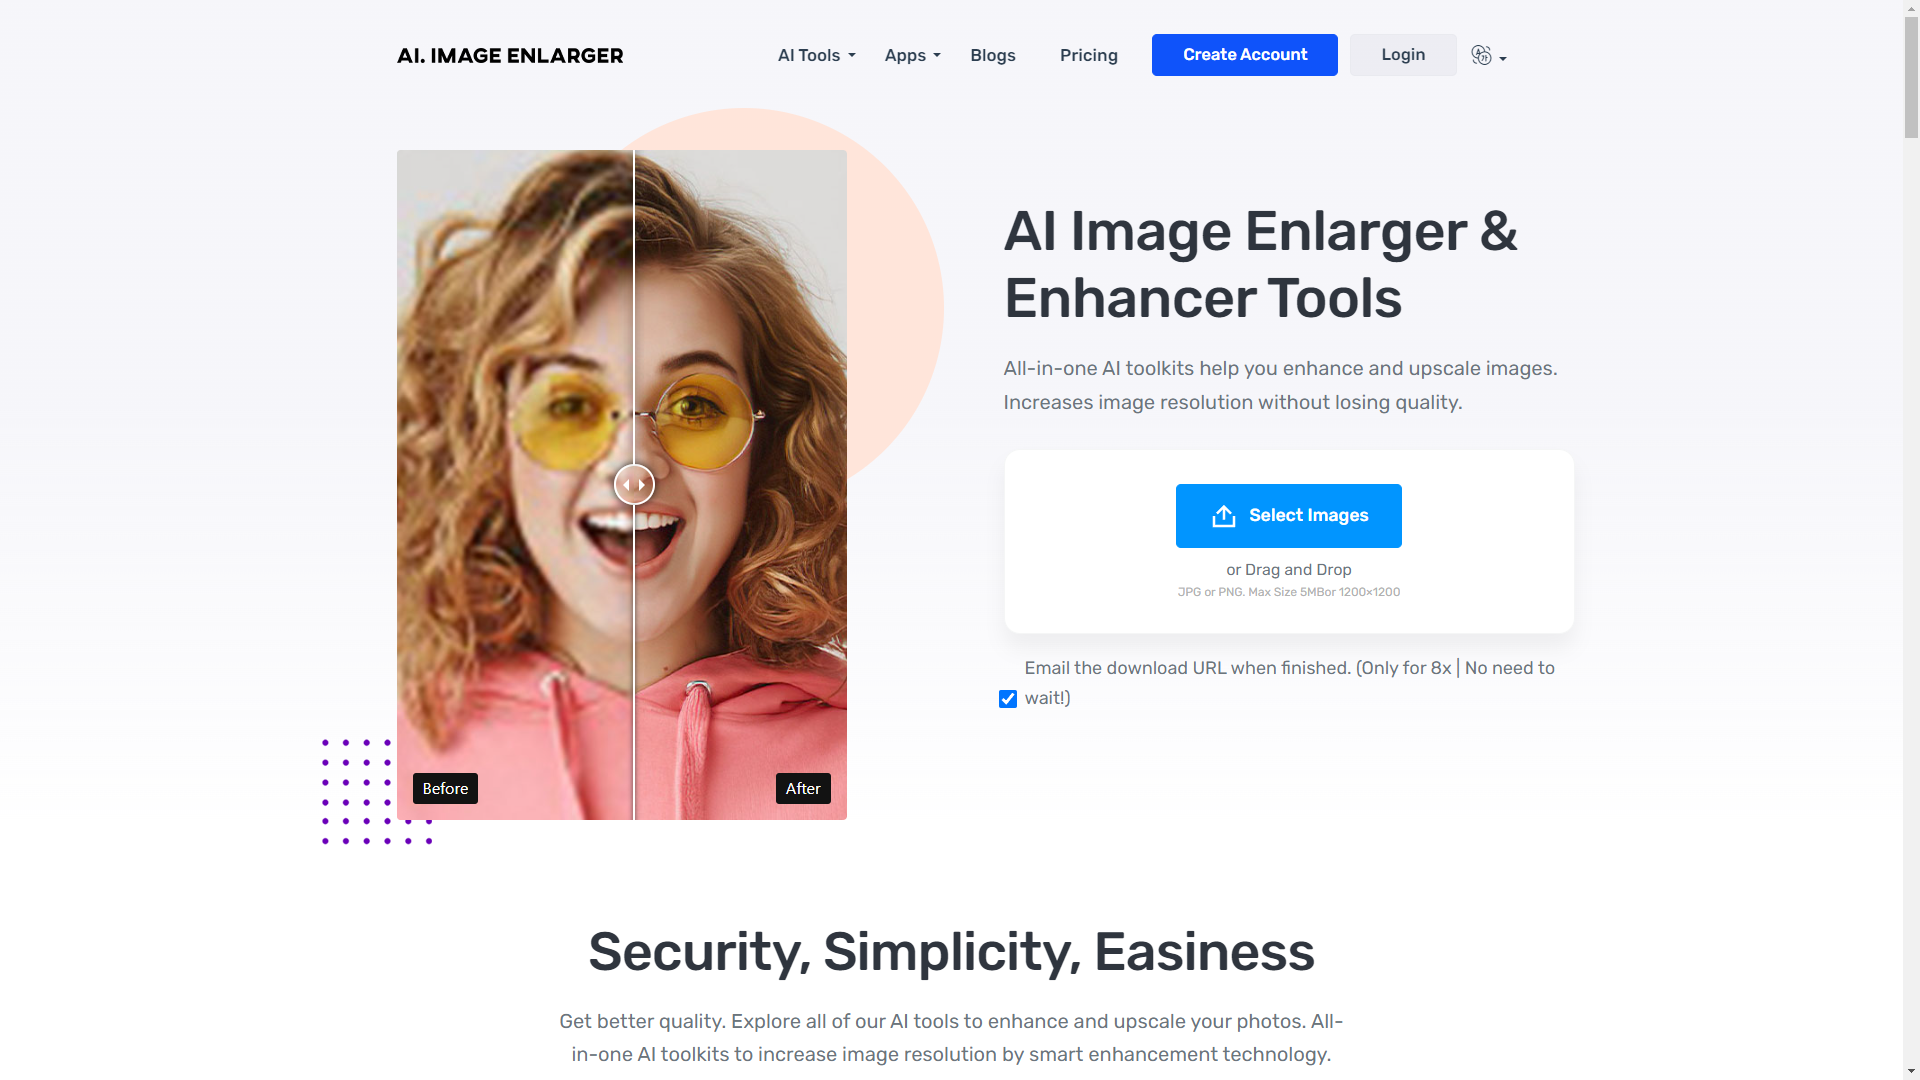 AI Image Enlarger - Use AI to upscale small or pixelated images